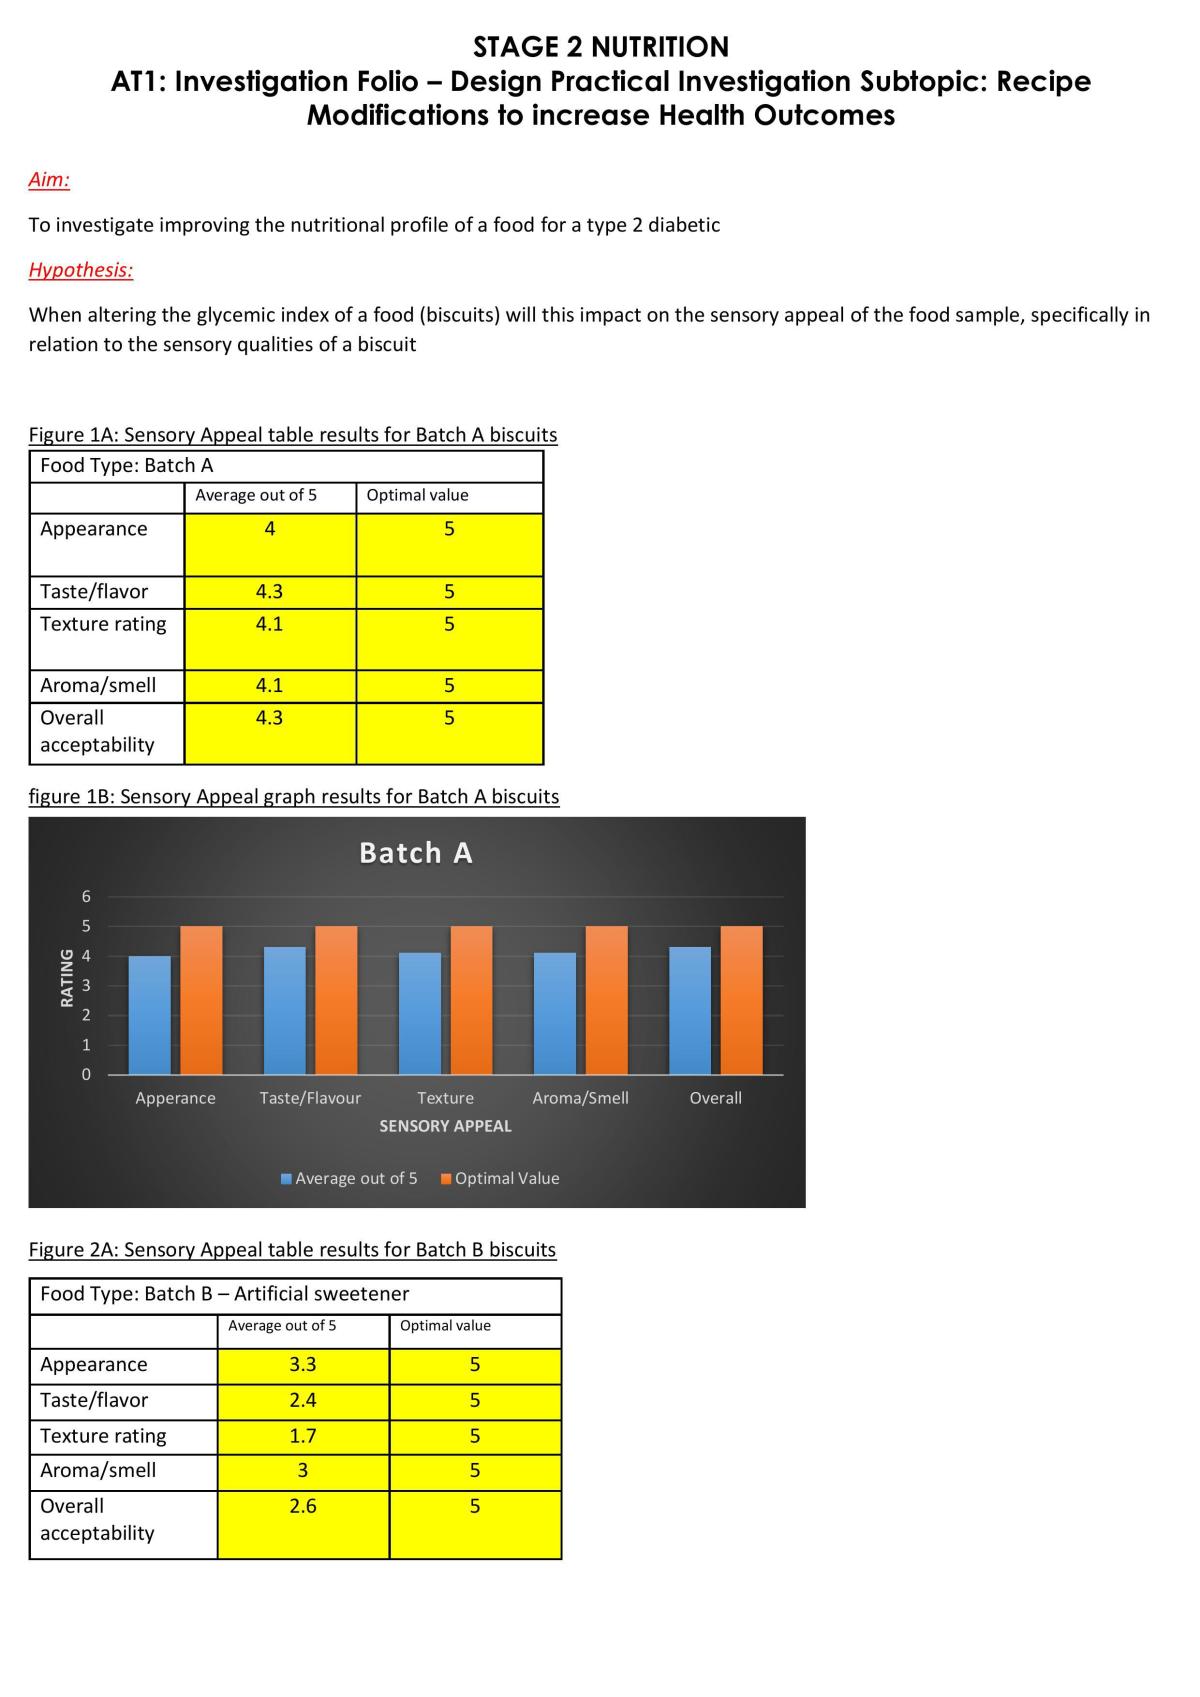 Stage 2 Nutrition Practical Report - Page 1